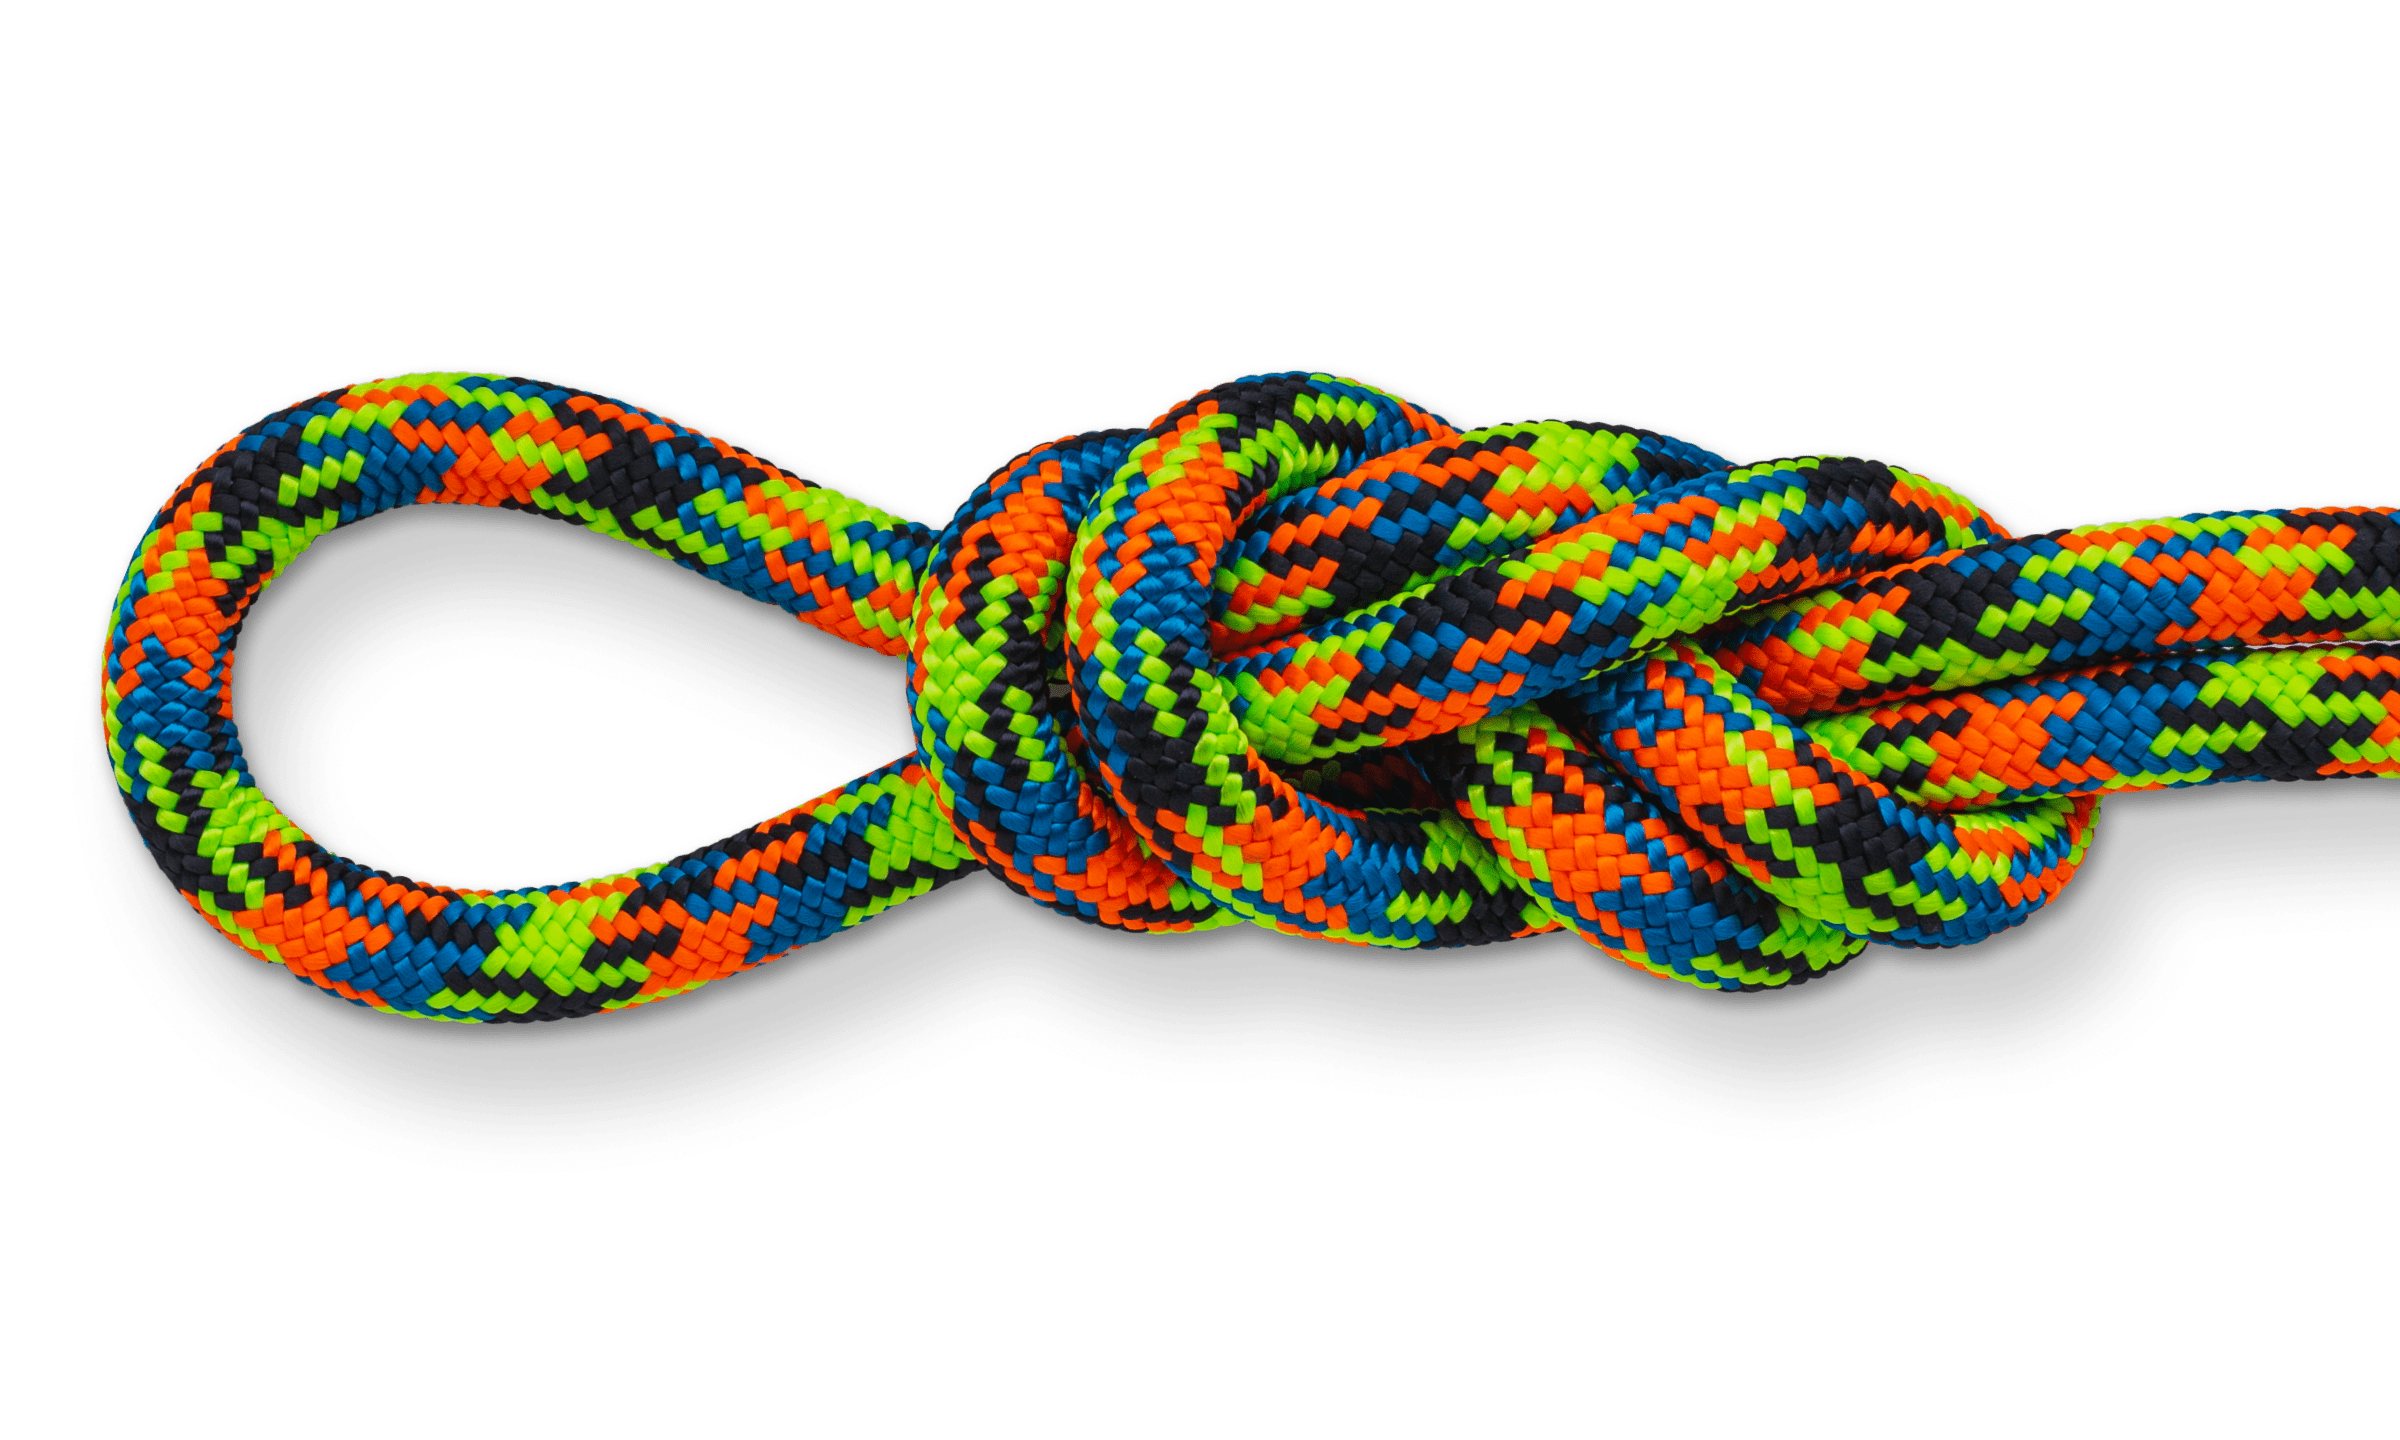 Xstatic climbing rope in a double figure eight knot